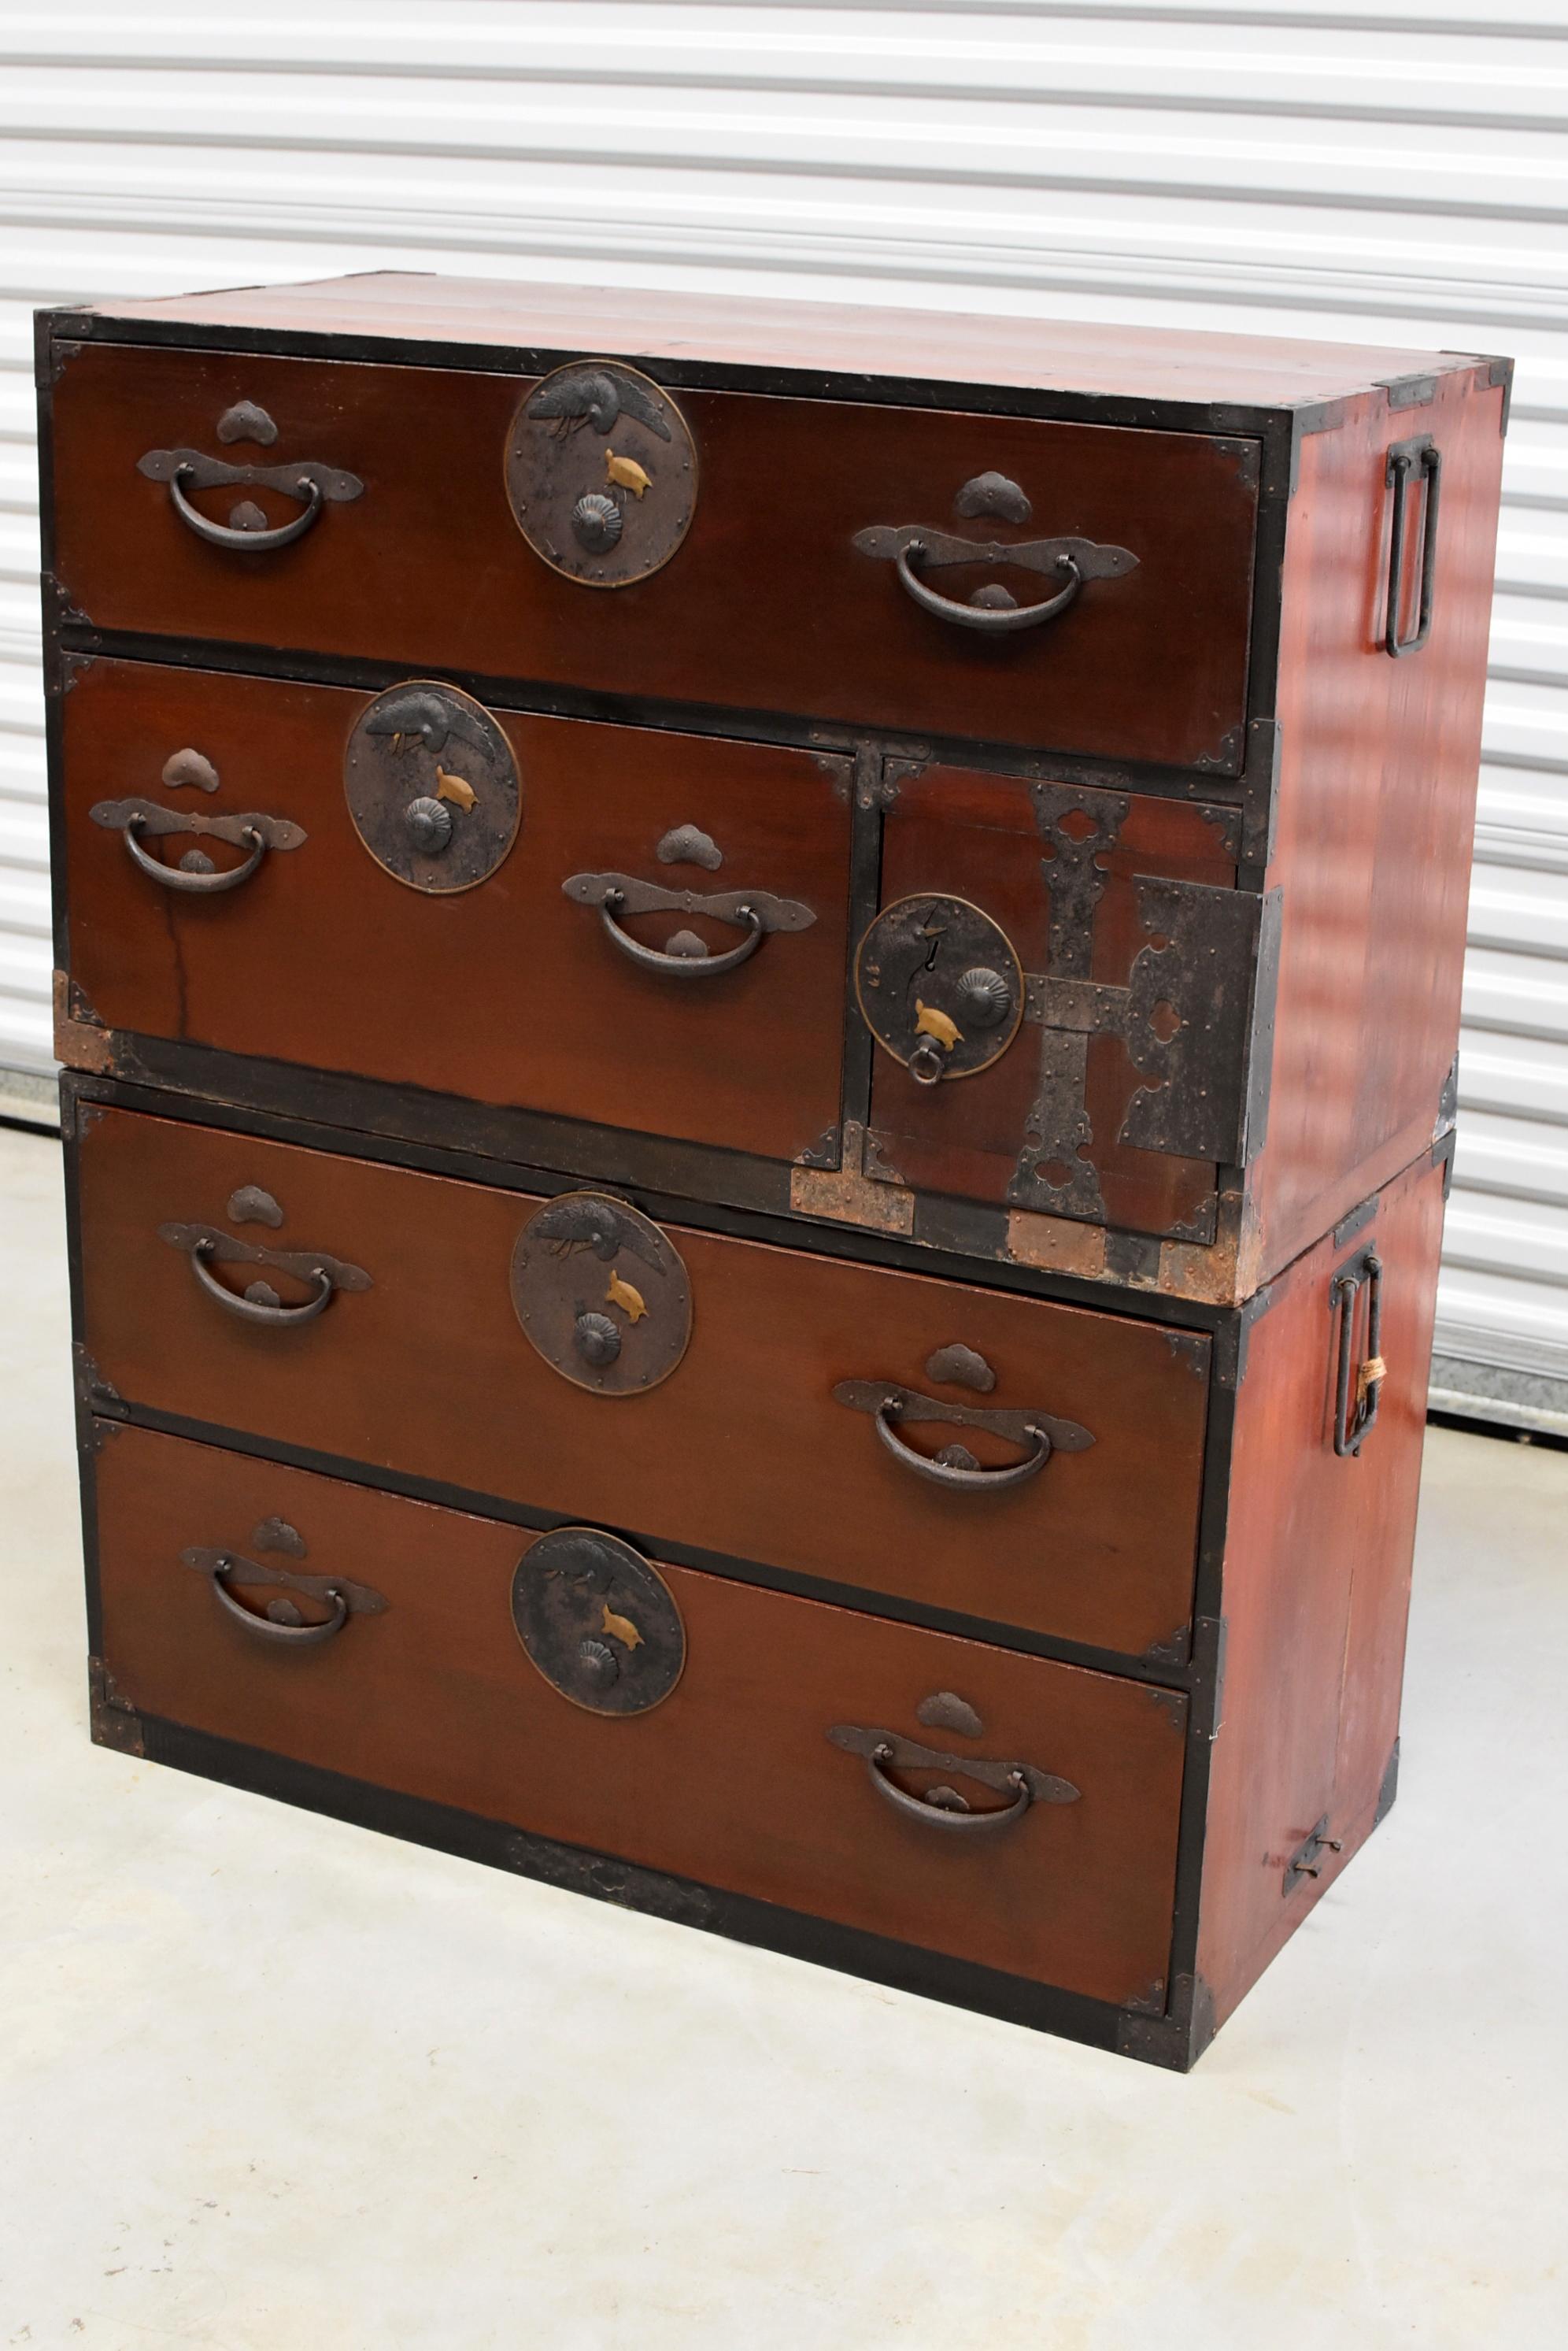 A beautiful vintage Japanese Tansu consists two individual chests that can be used separately. Beautiful, very unique, solid brass and iron hardware features cranes and turtles, both are symbols of long life and eternity. Chestnut chocolate finish